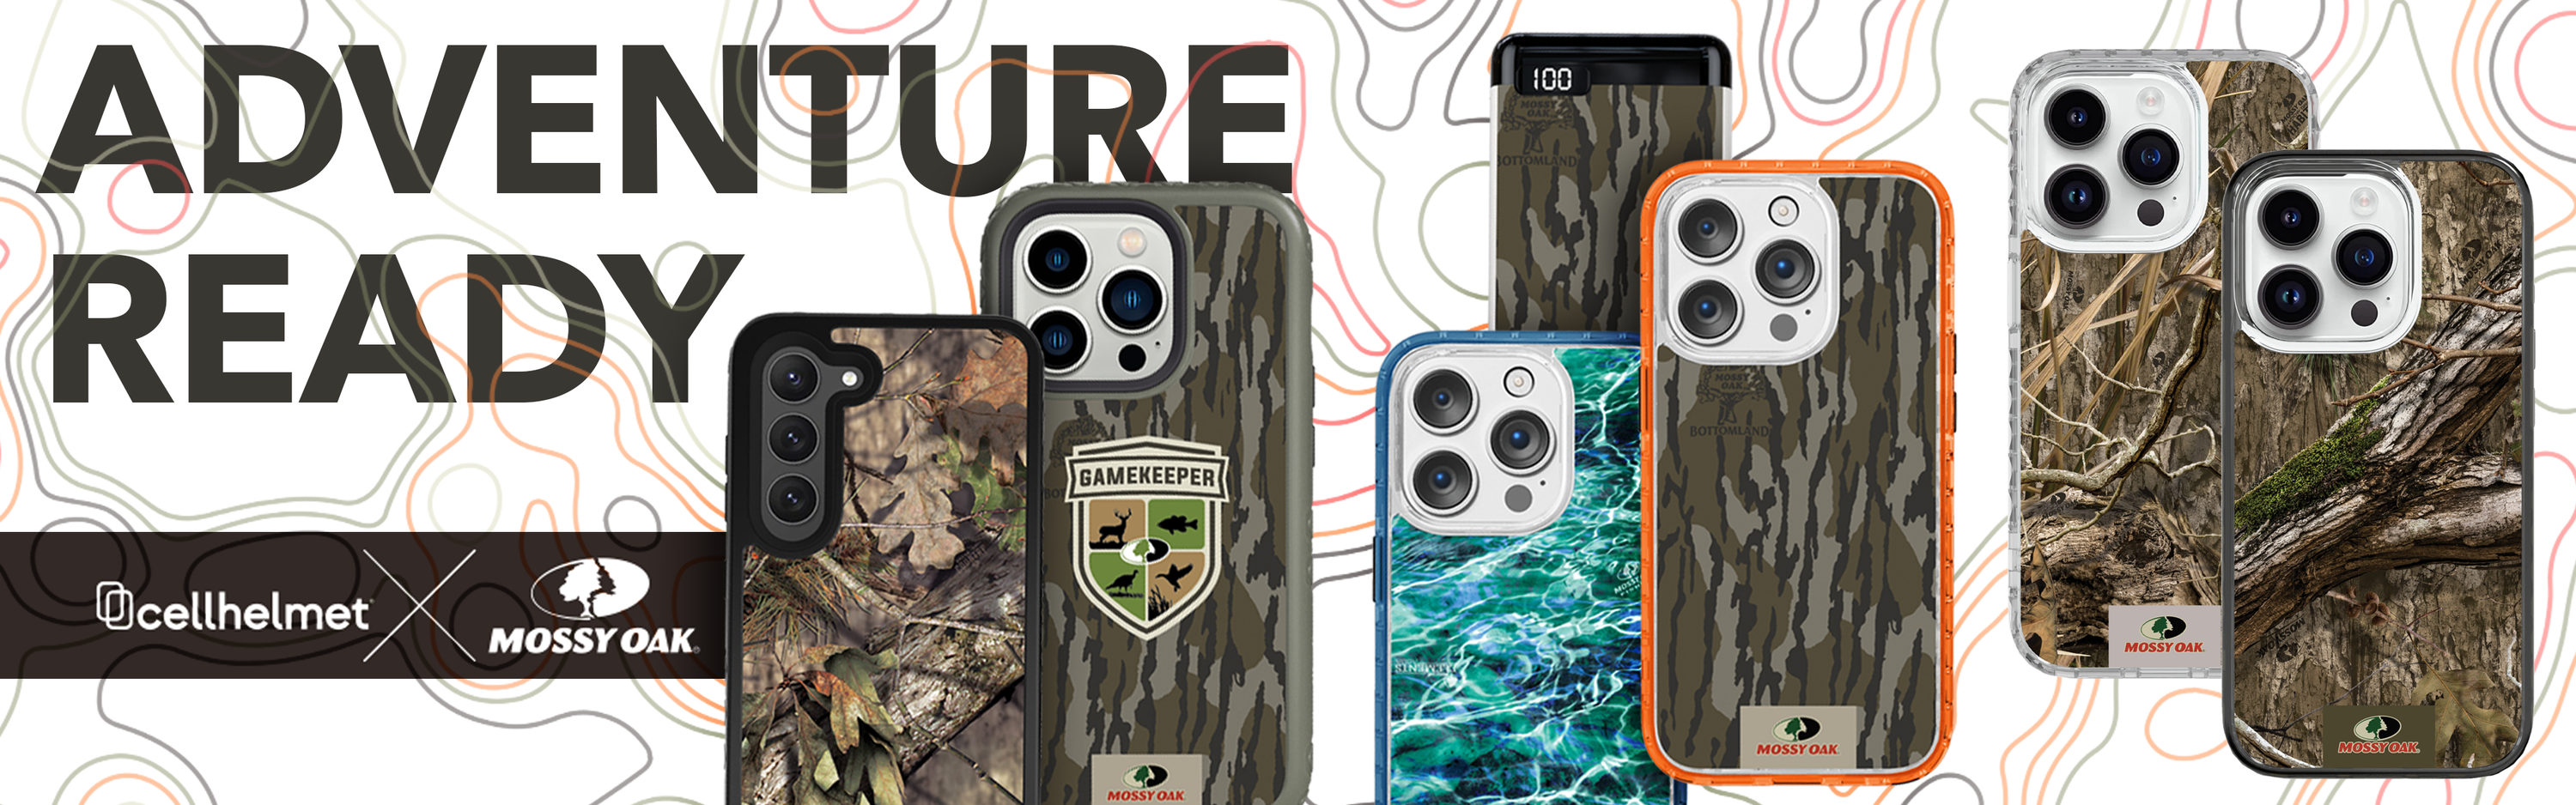 Mossy Oak Collection - Adventure Ready - Custom Cases & Power Banks - Click to Shop